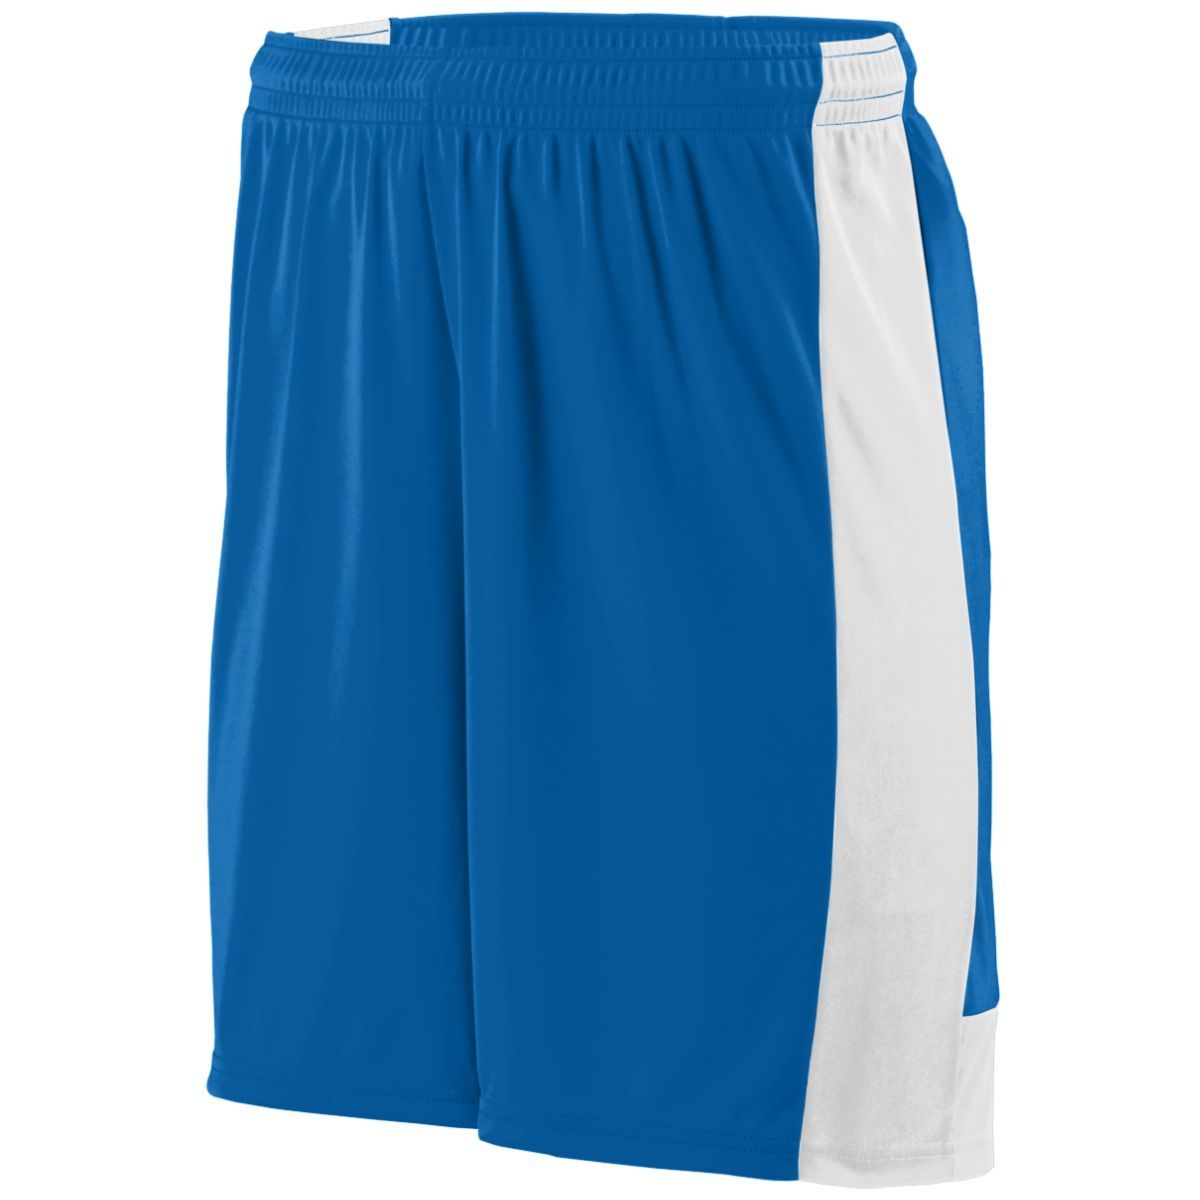 Augusta Sportswear Youth Lightning Shorts in Royal/White  -Part of the Youth, Youth-Shorts, Augusta-Products, Soccer, All-Sports-1 product lines at KanaleyCreations.com